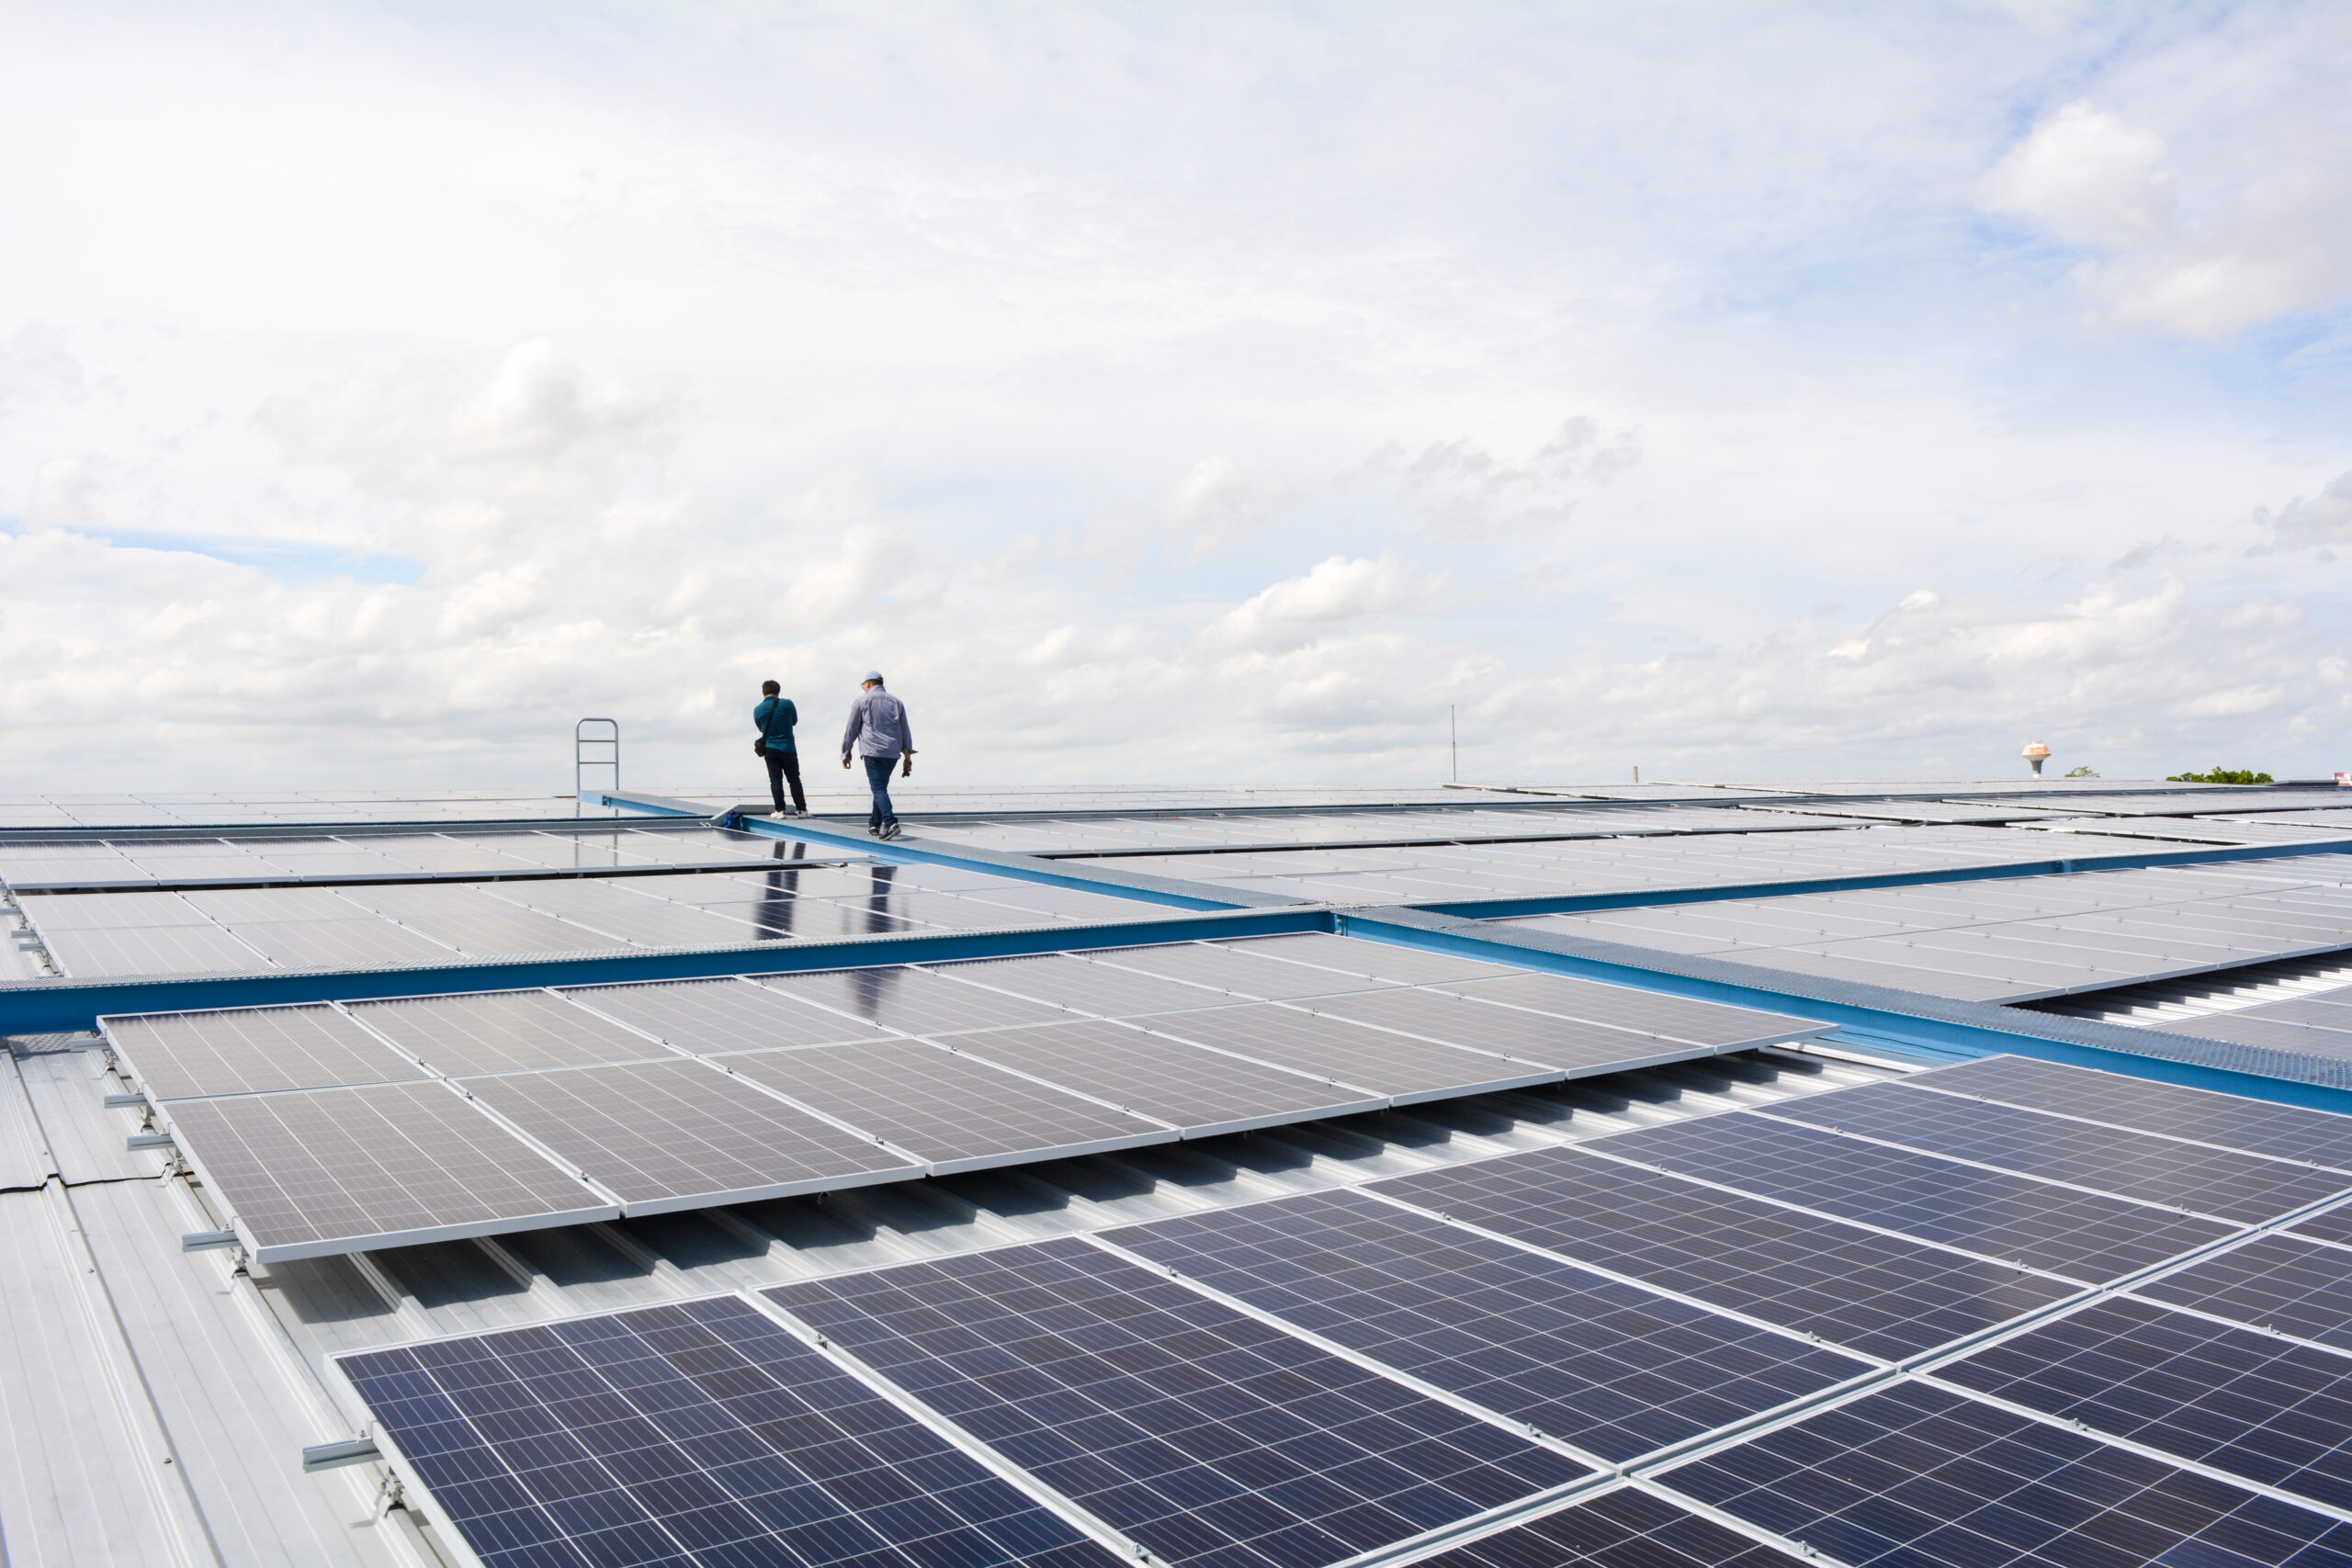 Close-up view of industrial rooftop solar panels with two men walking between the panel sets